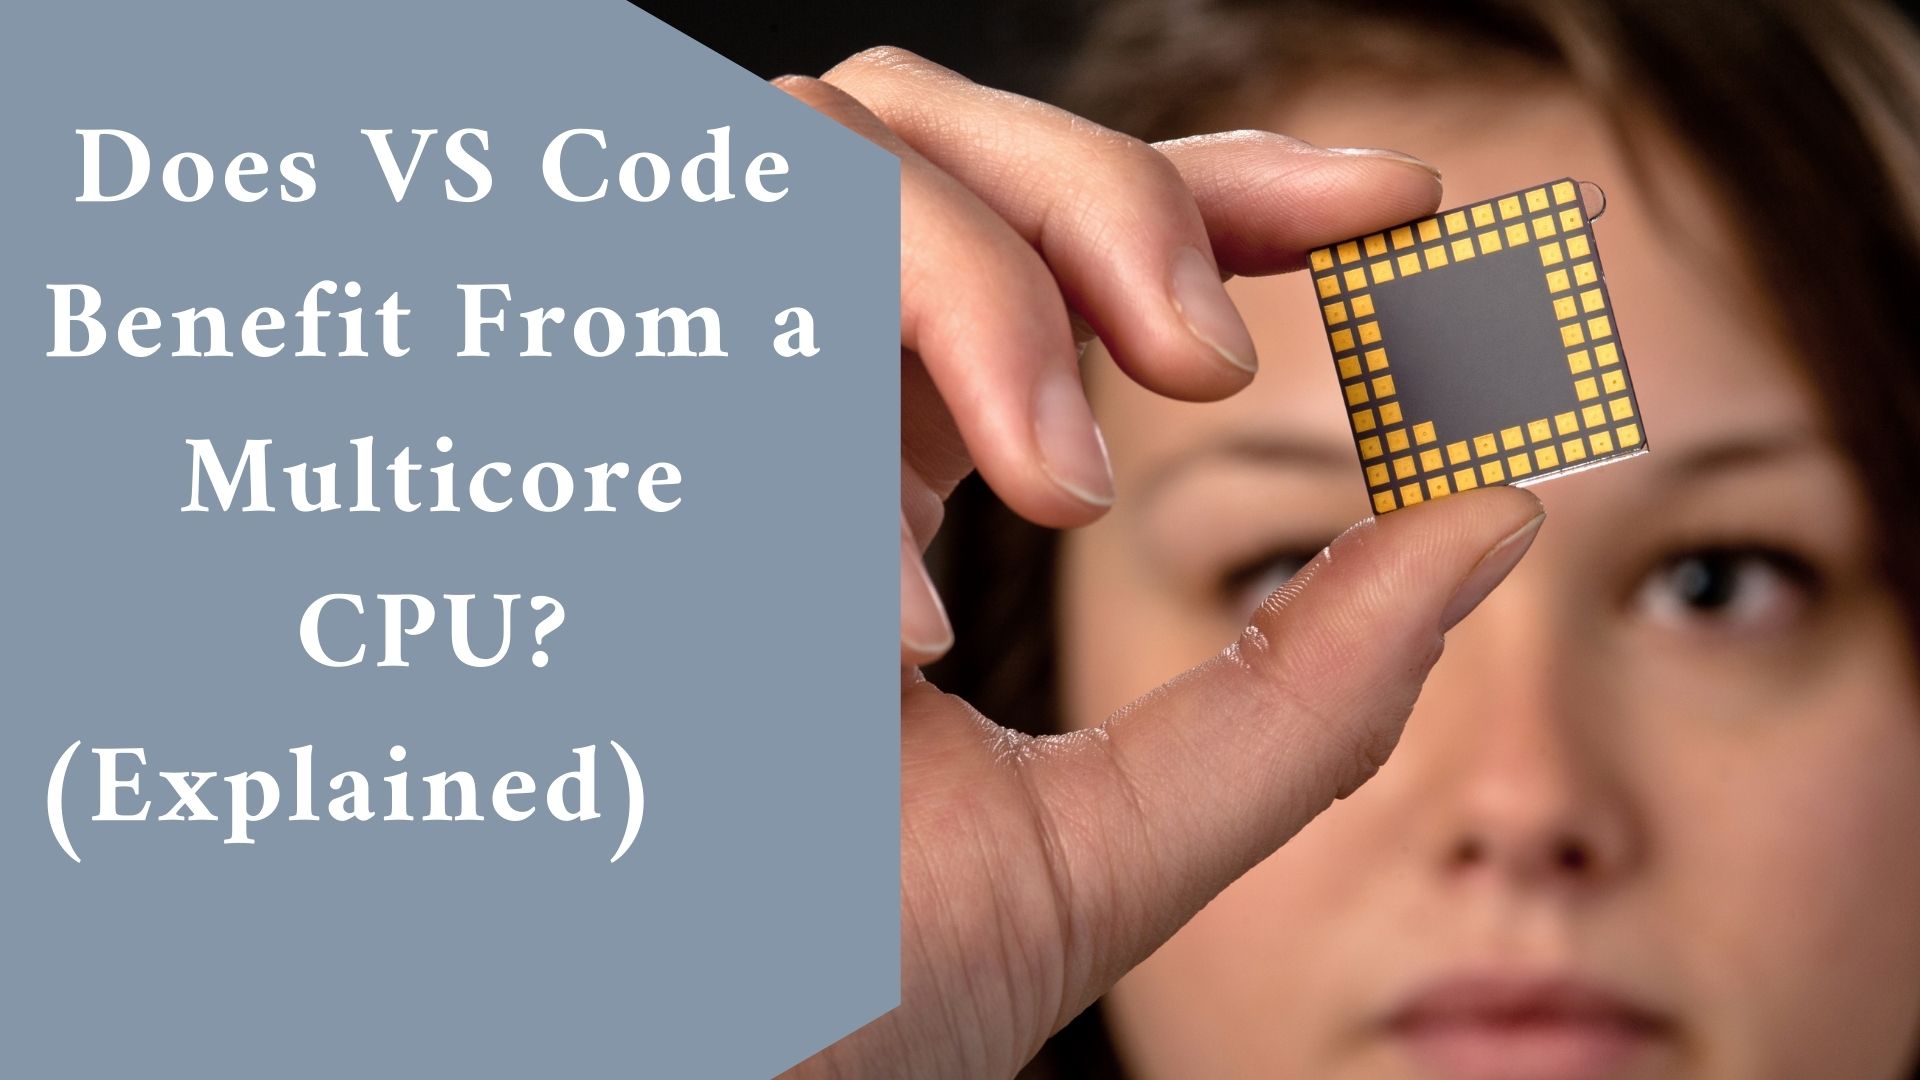 Does VS Code Benefit From a Multicore CPU? (Explained)